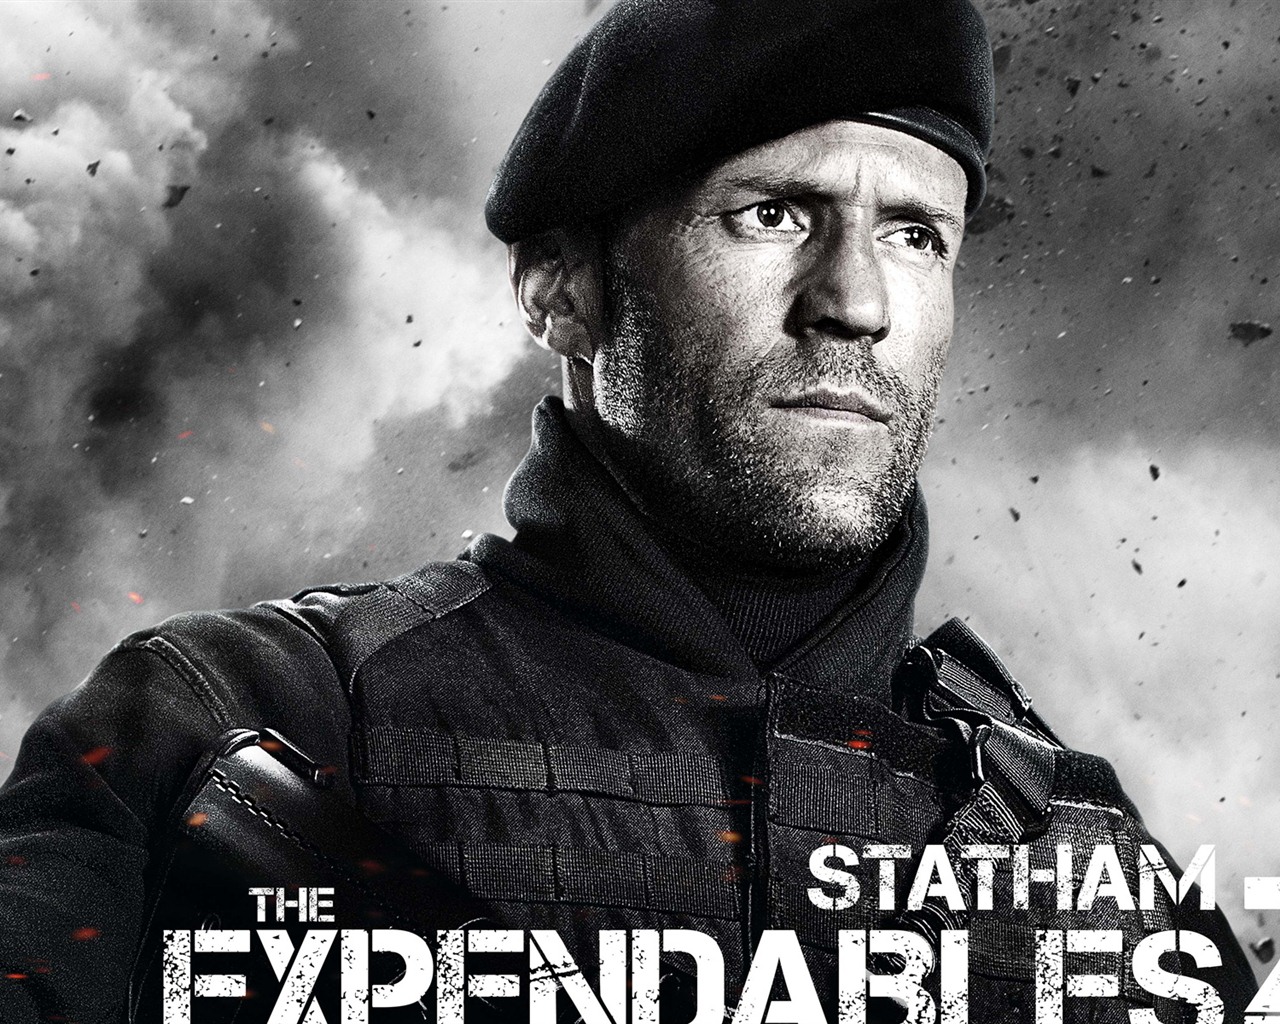 2012 The Expendables 2 敢死队2 高清壁纸5 - 1280x1024